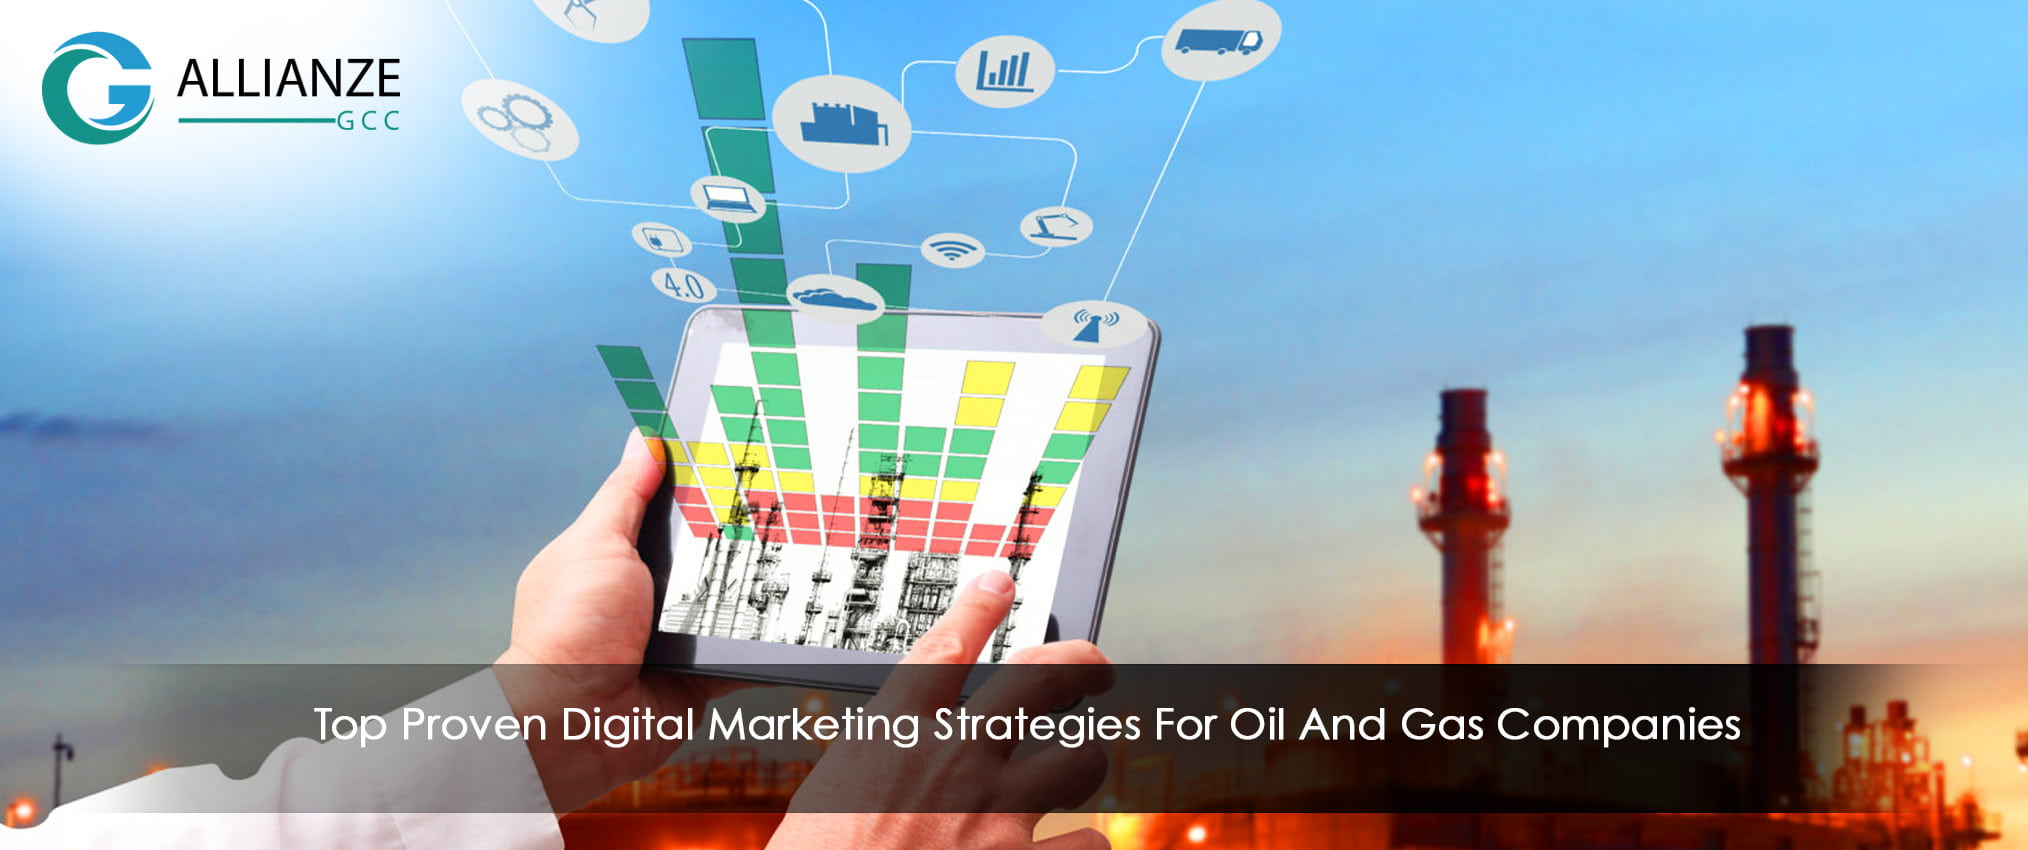 Top Proven Digital Marketing Strategies For Oil And Gas Companies